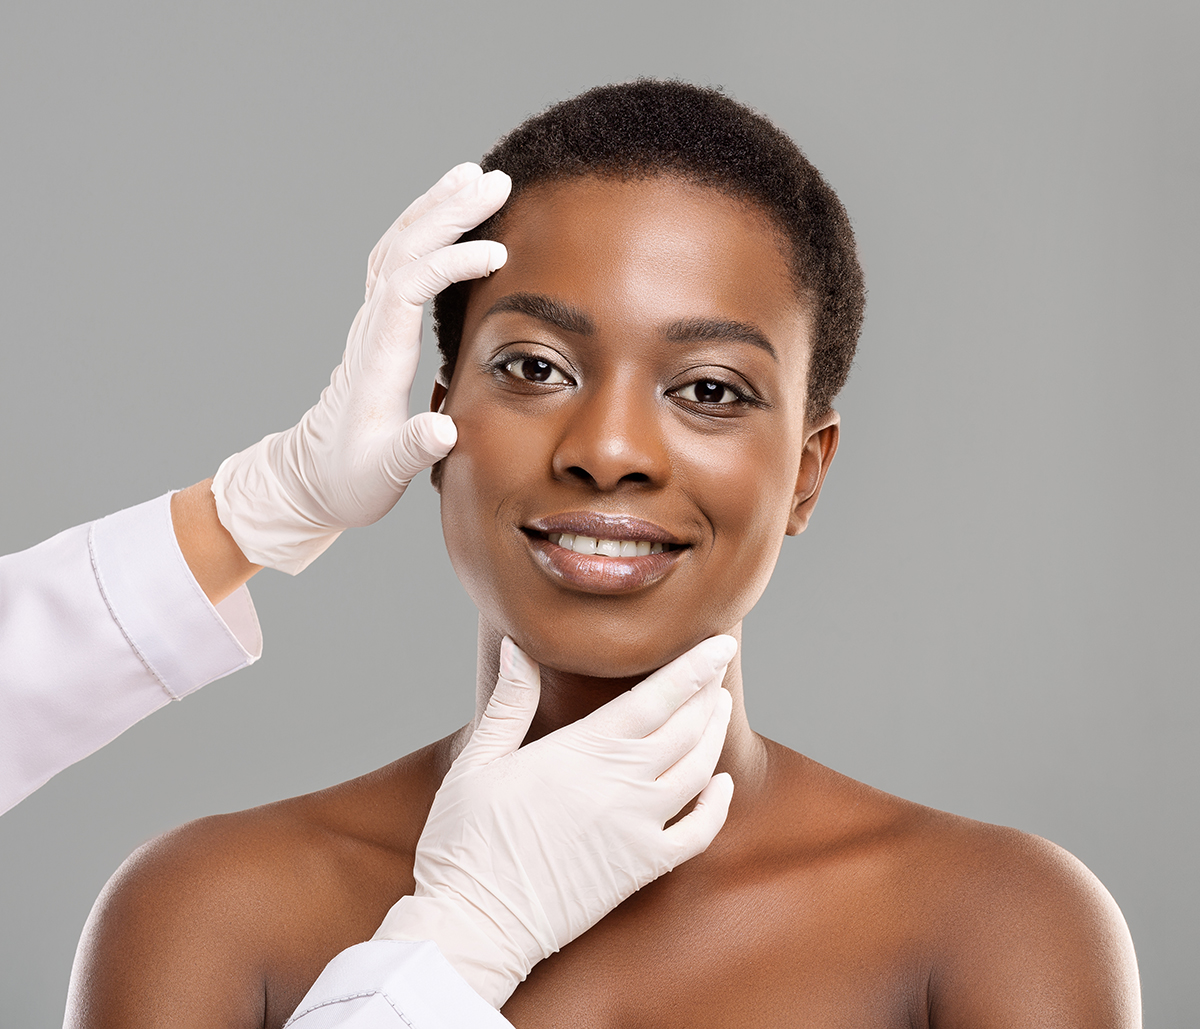 Services offered by your dermatologist